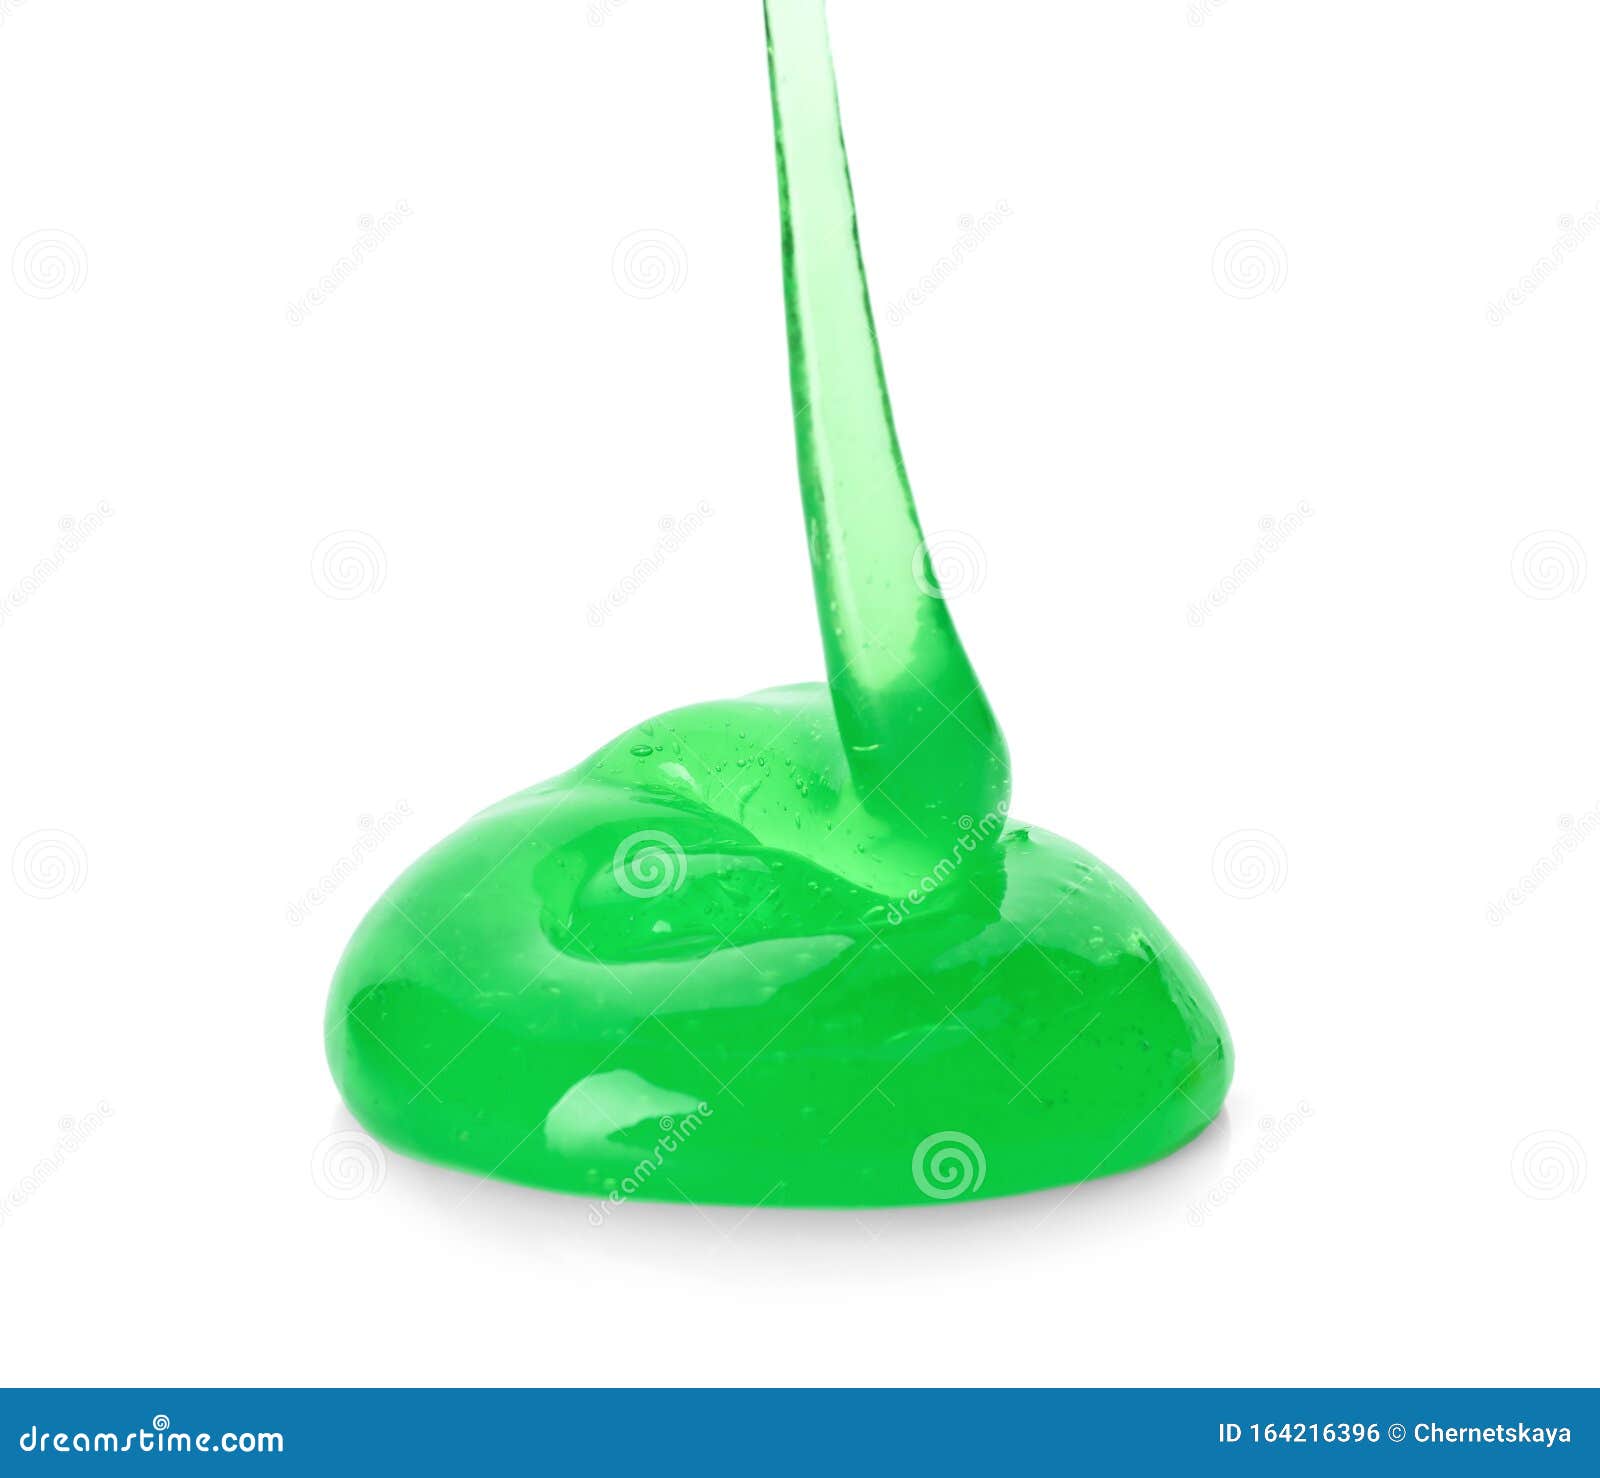 Flowing Green Slime On White Background. Antistress Toy Stock Photo ...